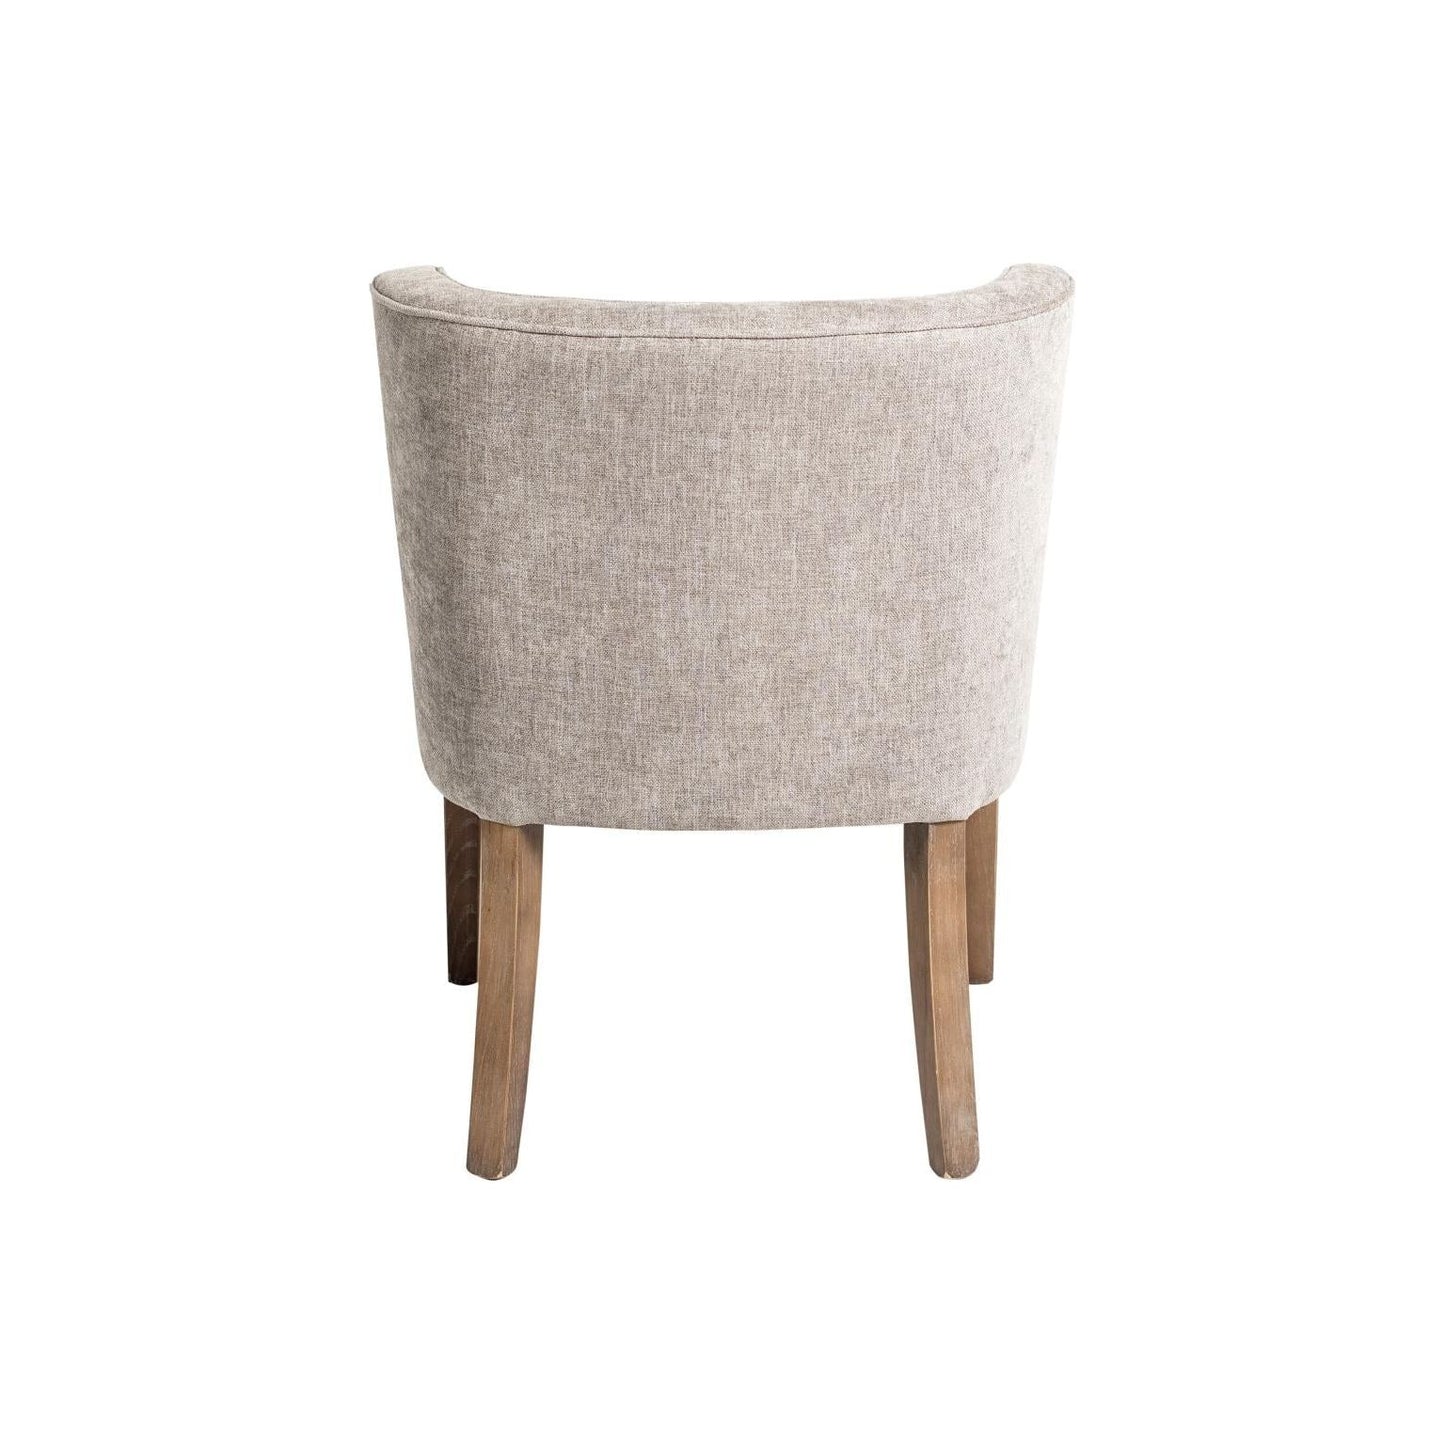 A versatile modern chair, the __Charlie Dining Chair__ features a curved back and is upholstered in light beige fabric, standing on four simple wooden legs. It is viewed from the side-back angle against a plain white background, embodying modern elegance.